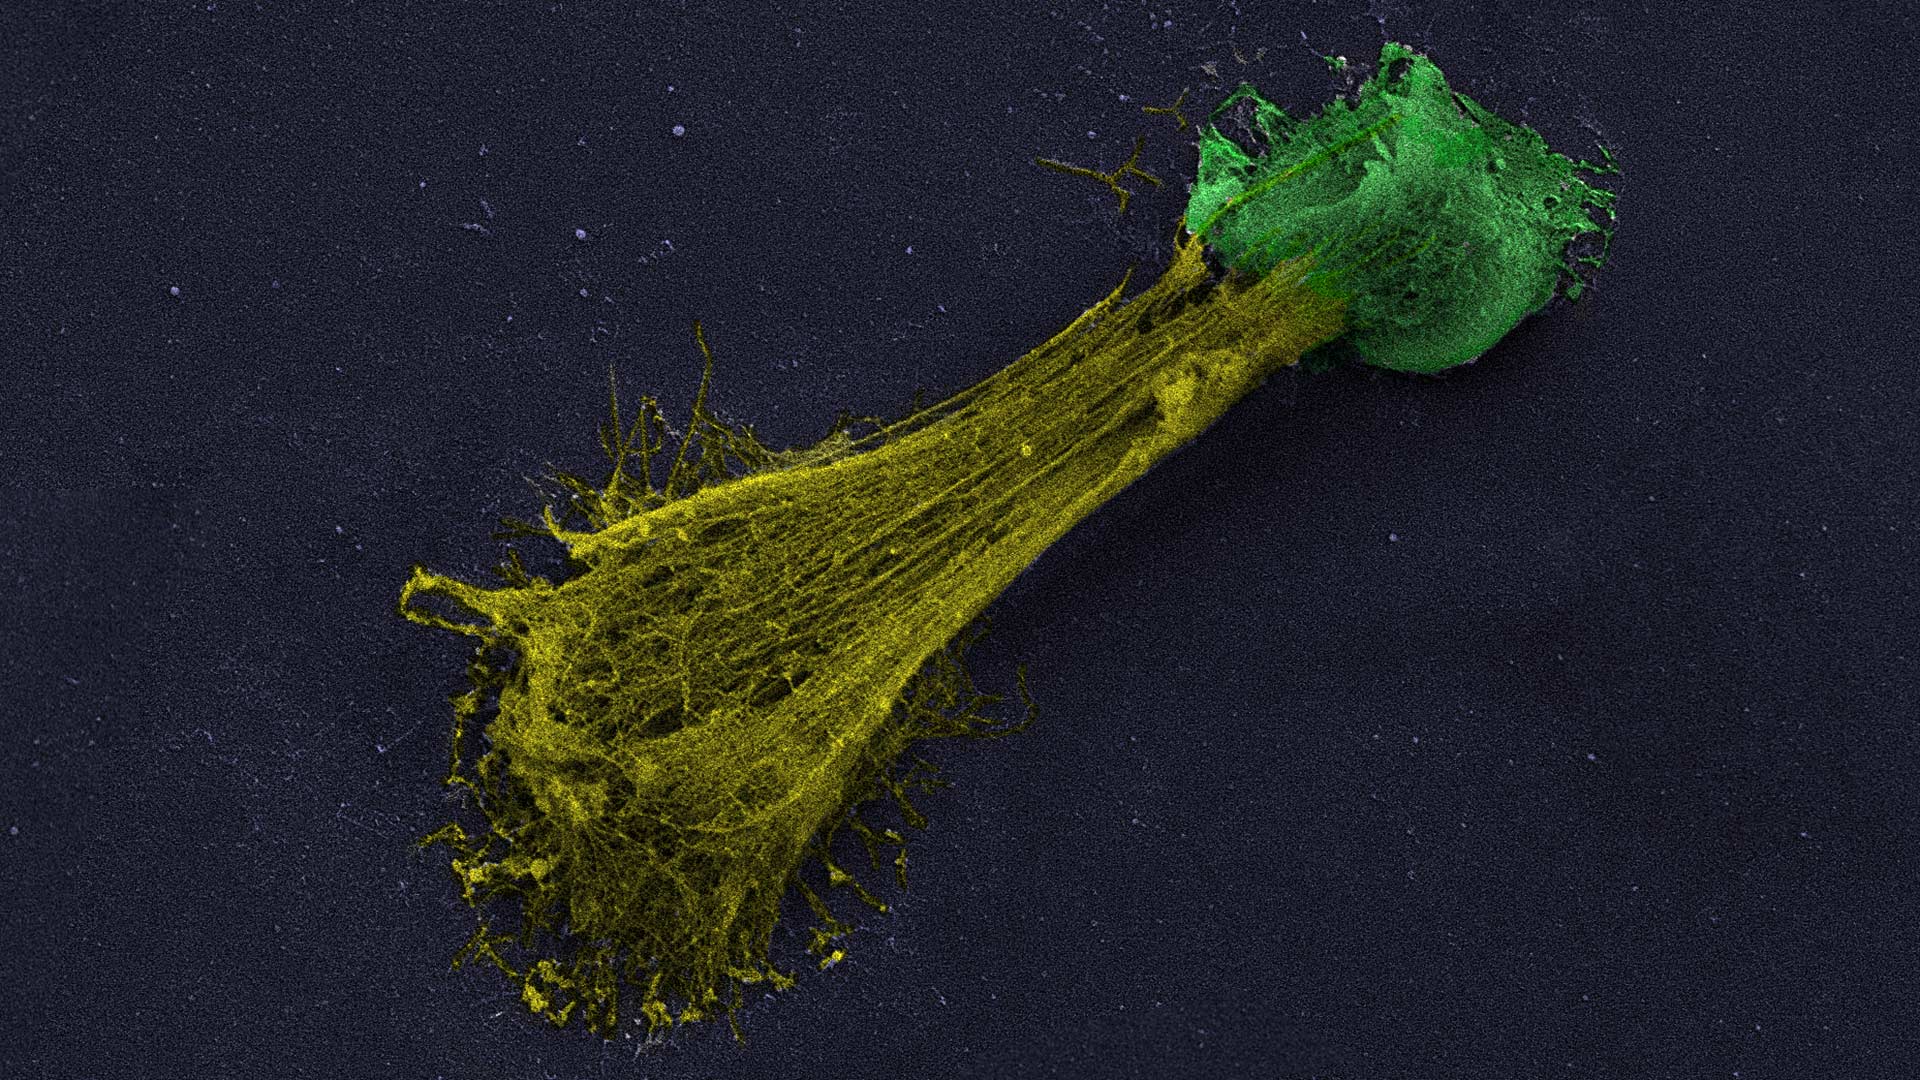 image of a neutrophil extracellular trap